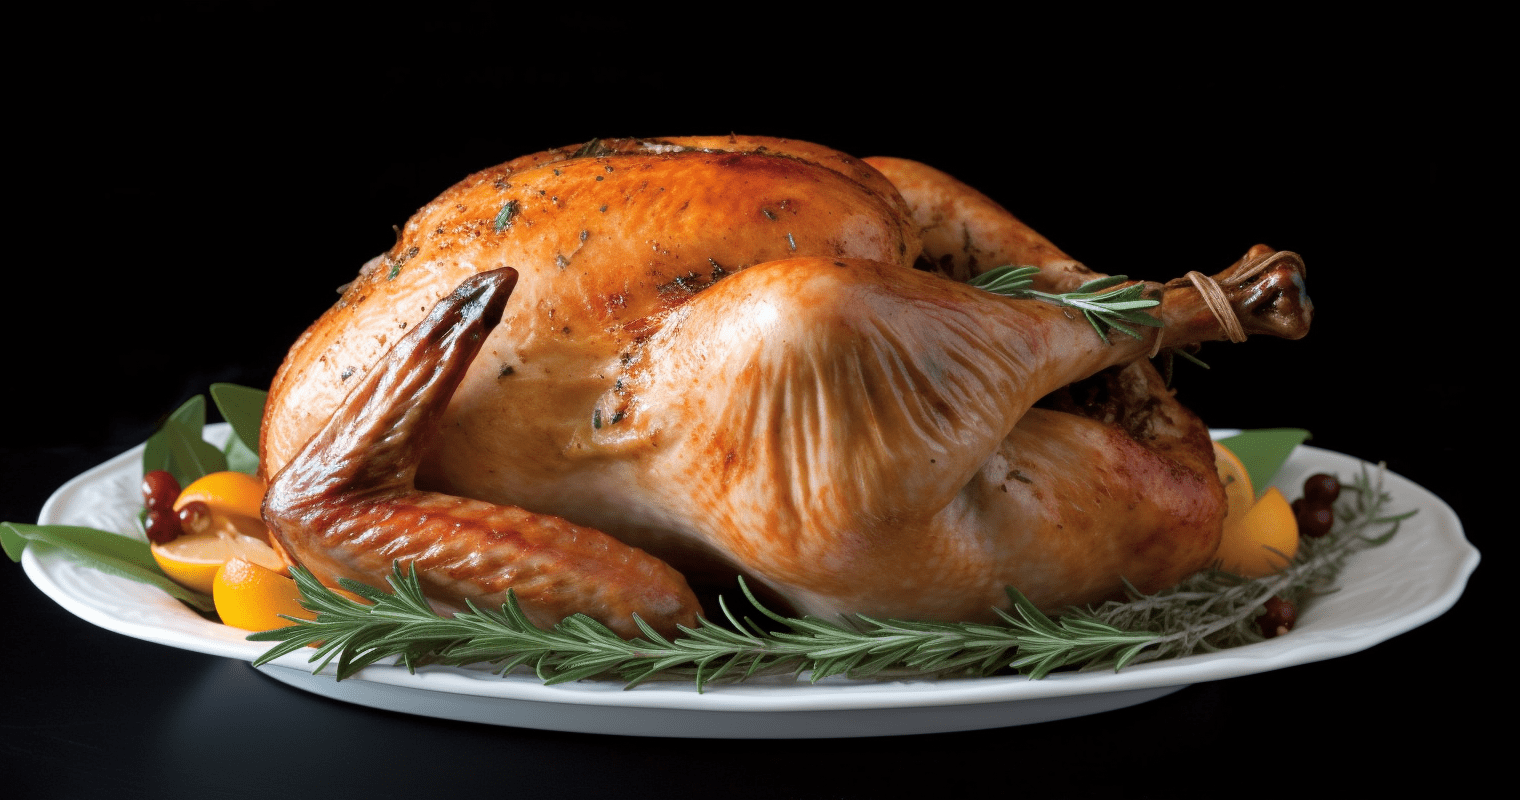 The Perfect Roast Turkey with Stuffing Recipe: A Classic Dish for Holiday Gatherings